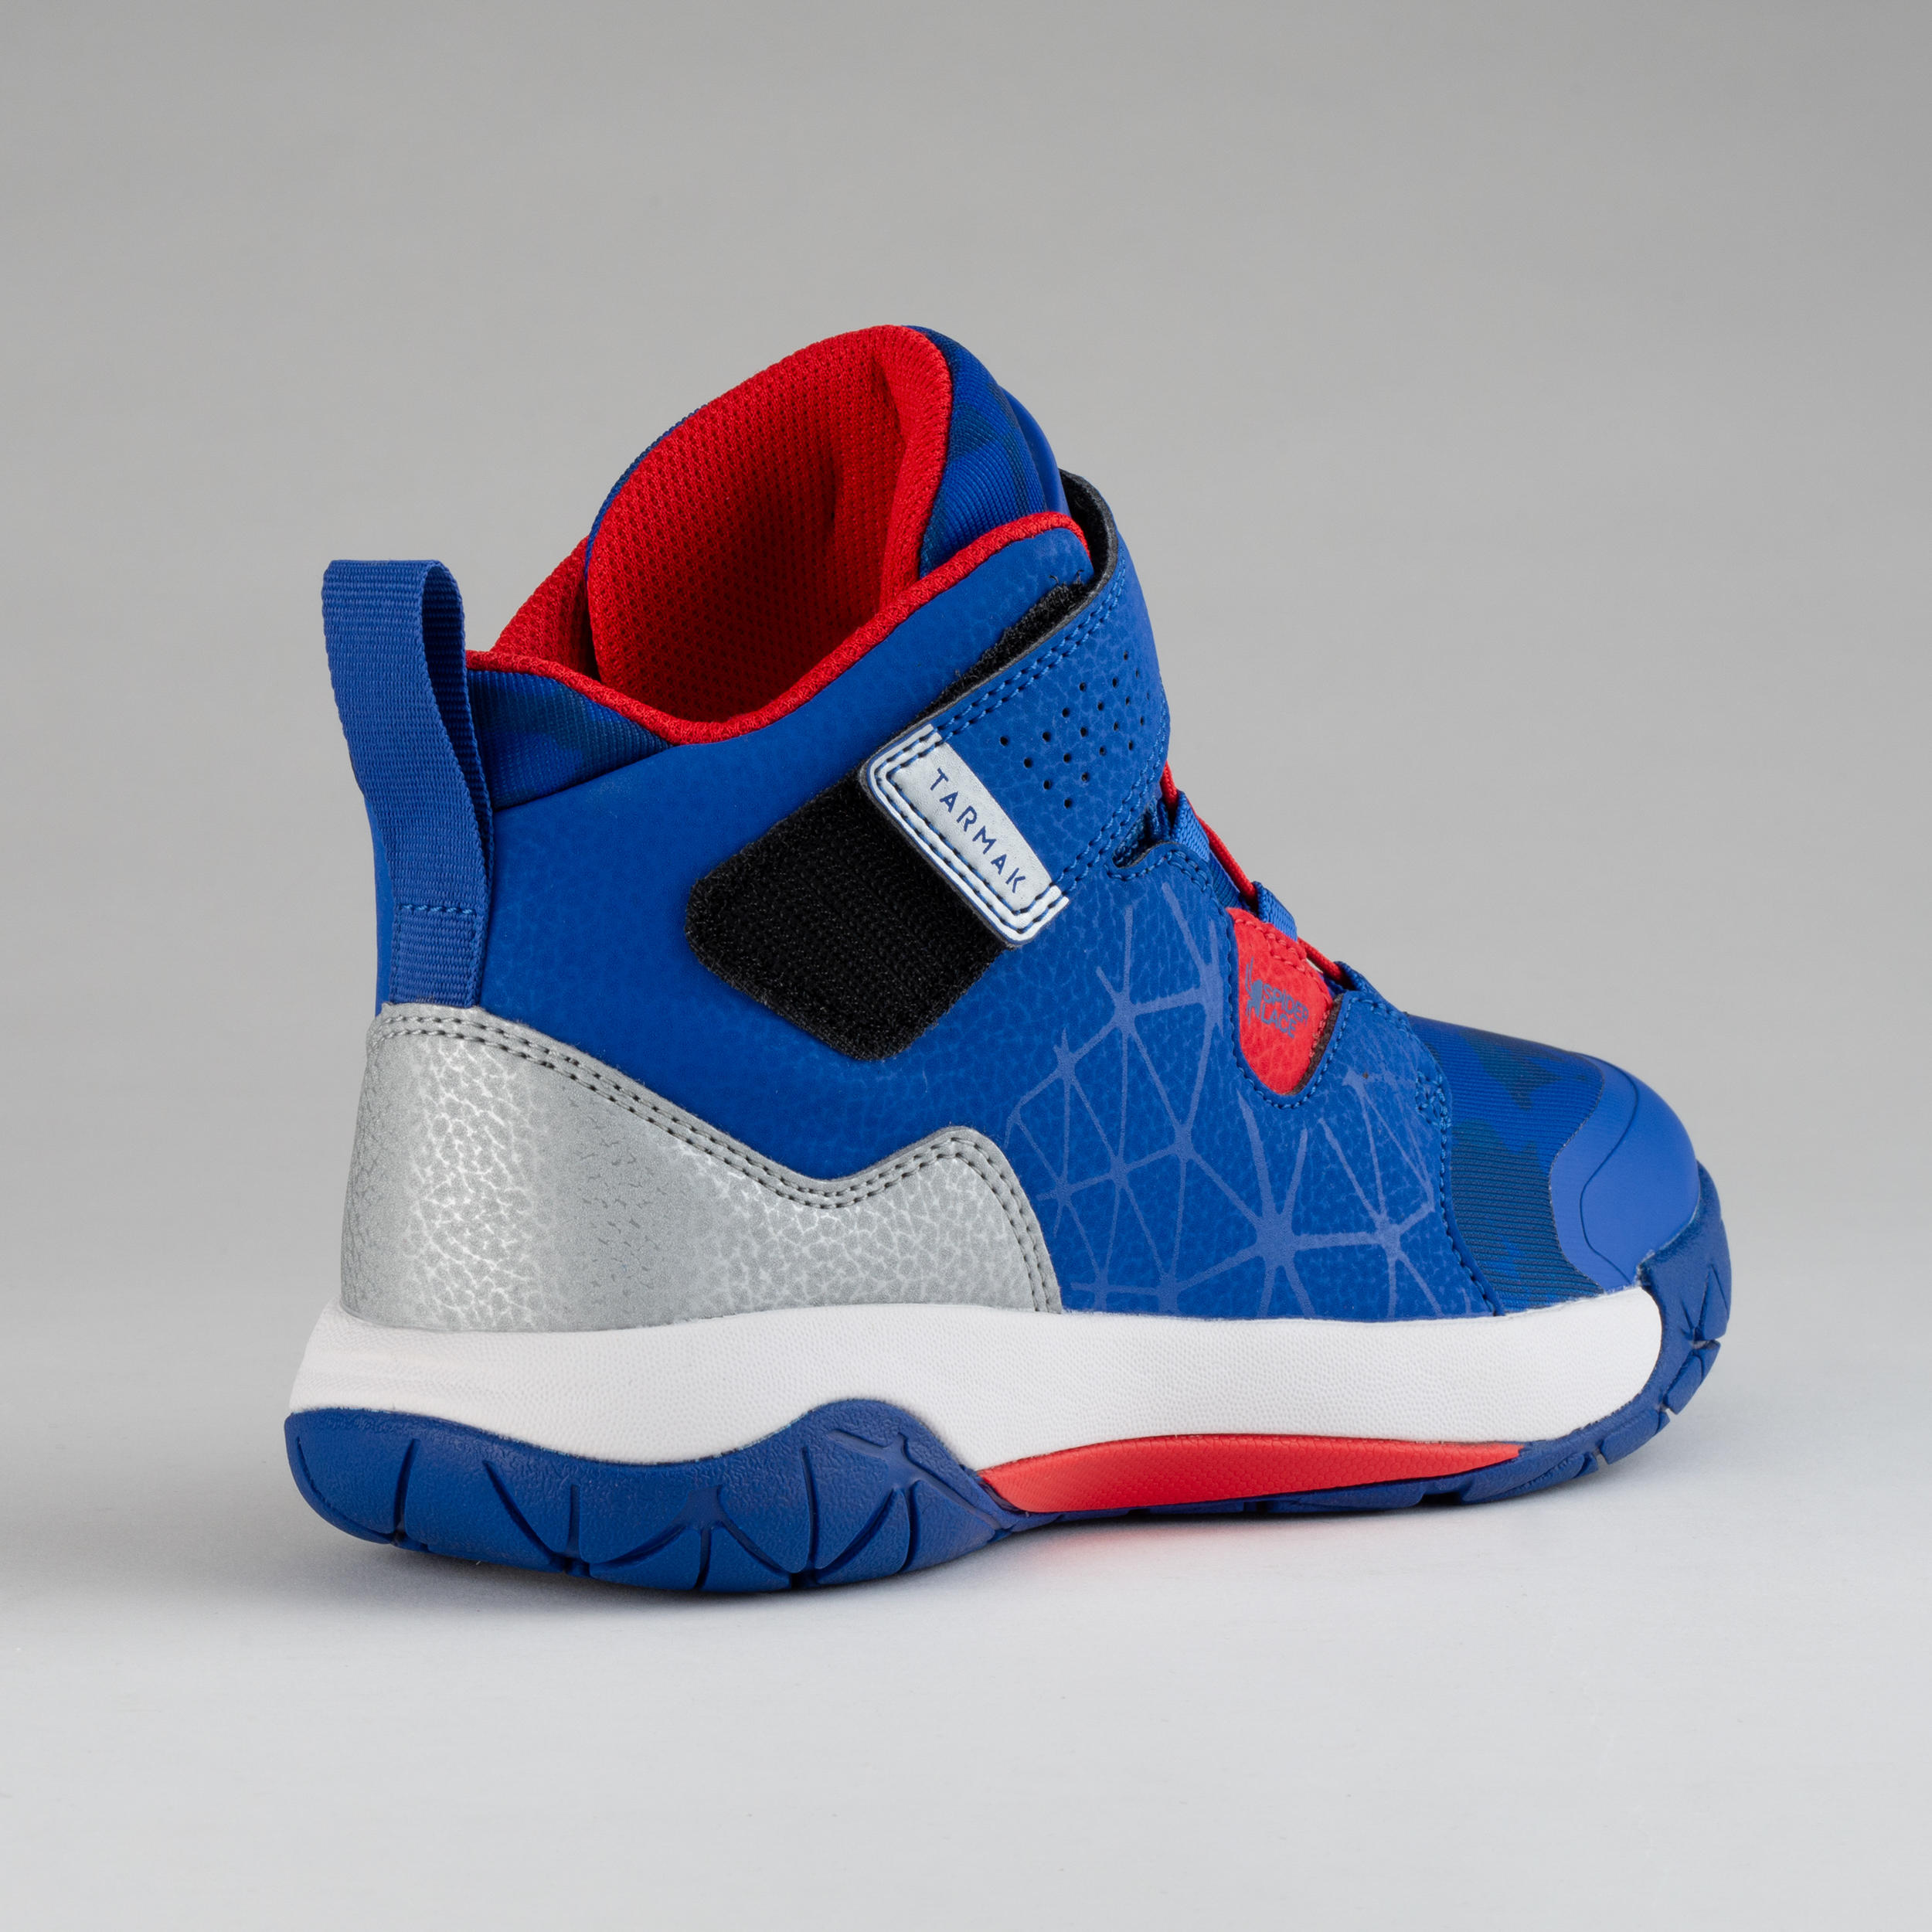 Boys'/Girls' Intermediate Basketball Shoes - Blue/Red Spider Lace 4/9